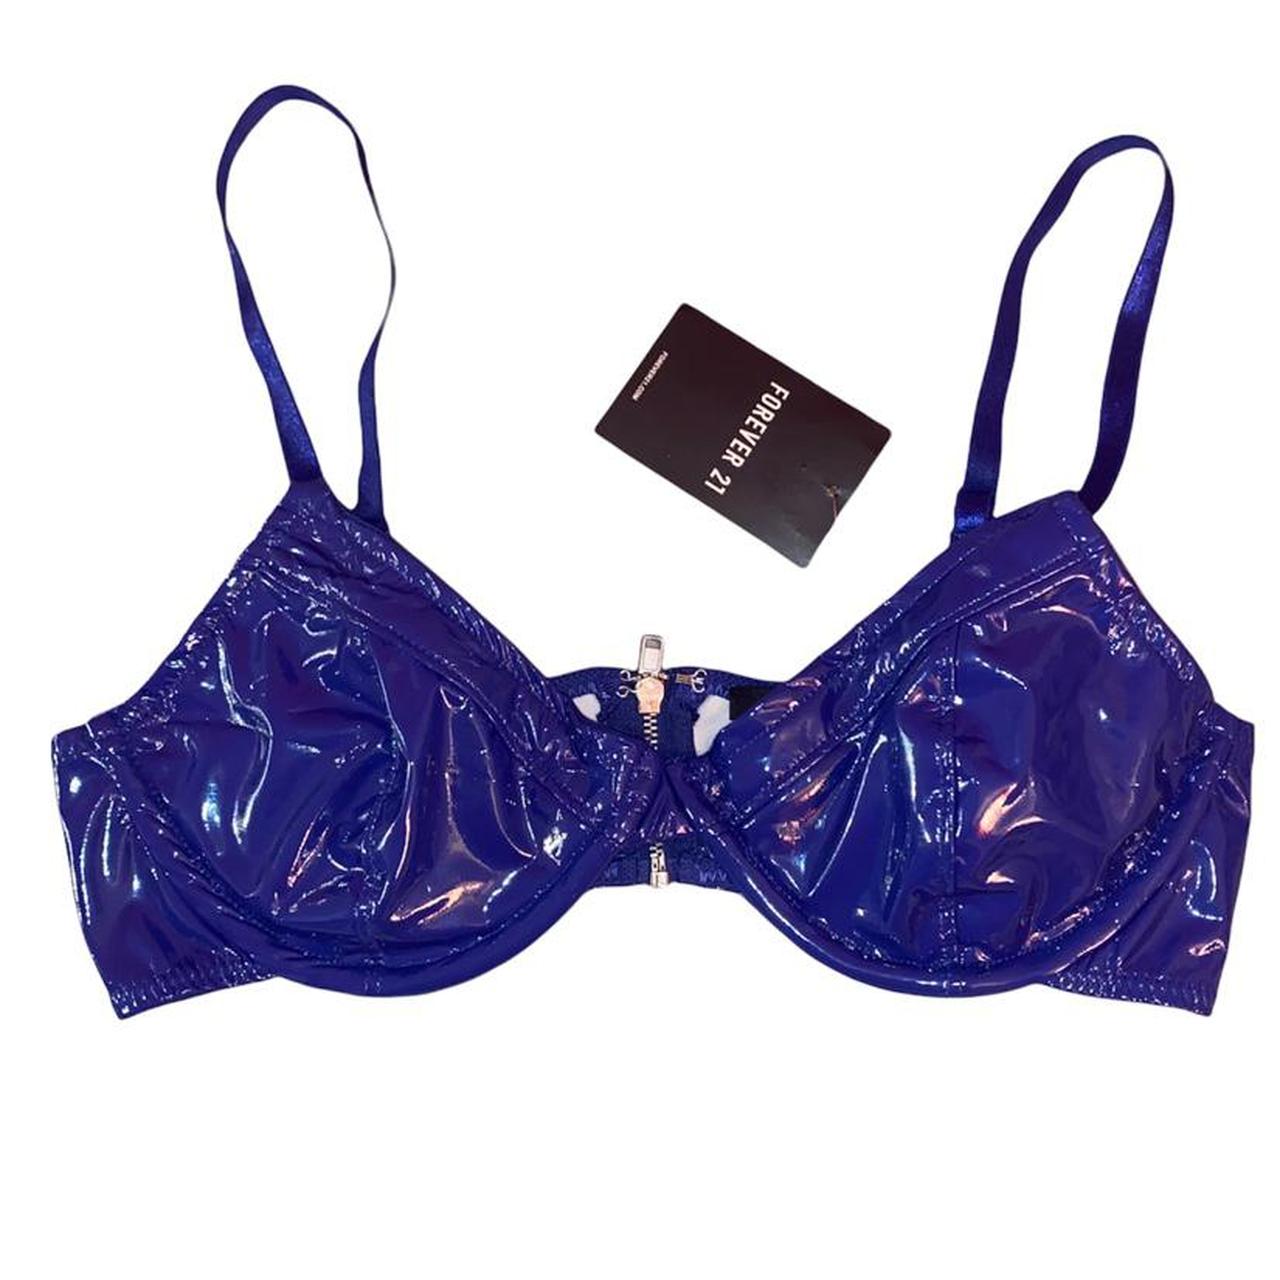 Product Image 1 - BLUE BRALETTE! Never worn with